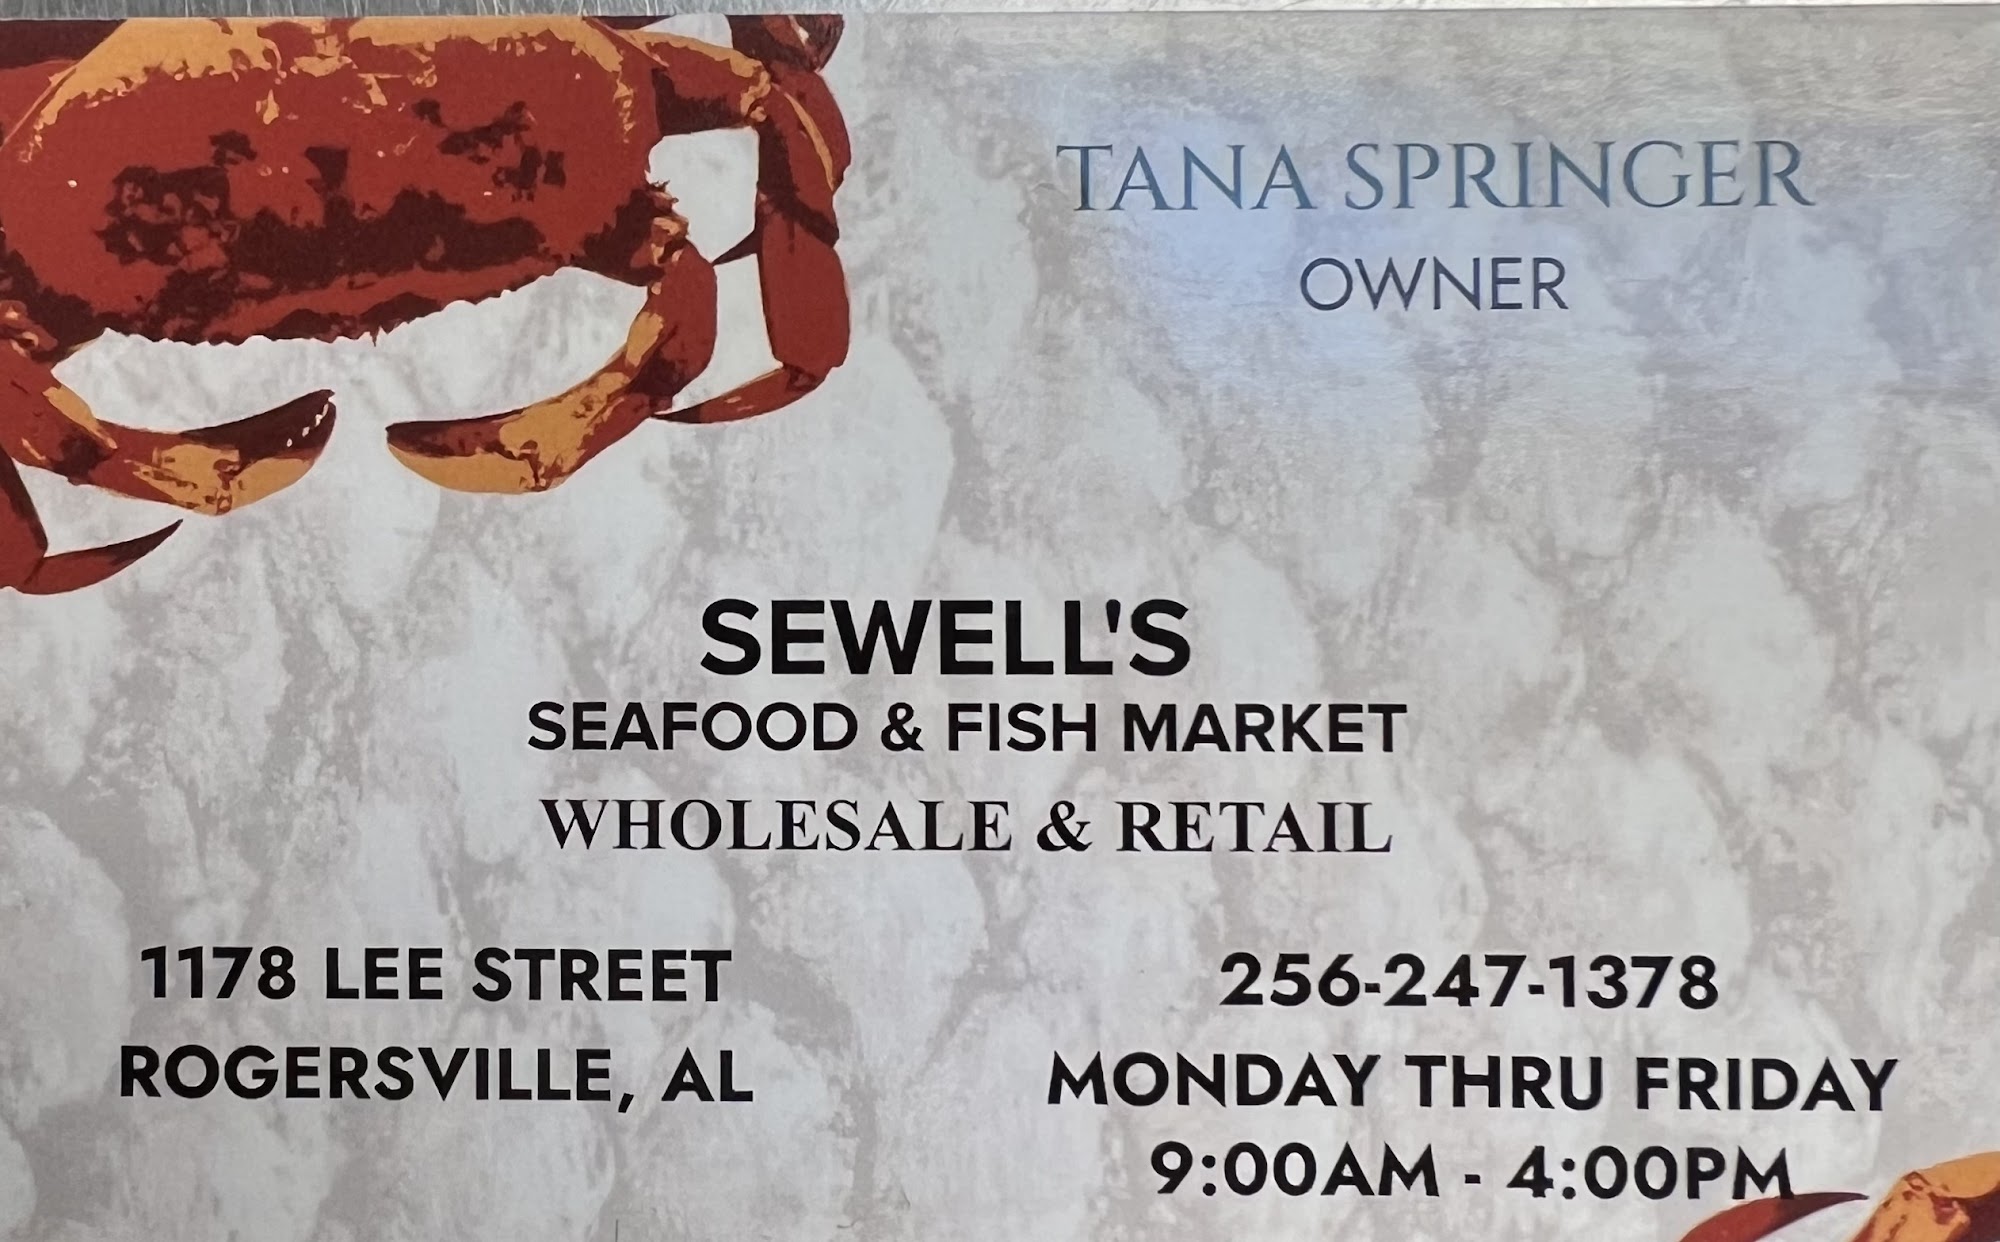 Sewell's Seafood & Fish Market